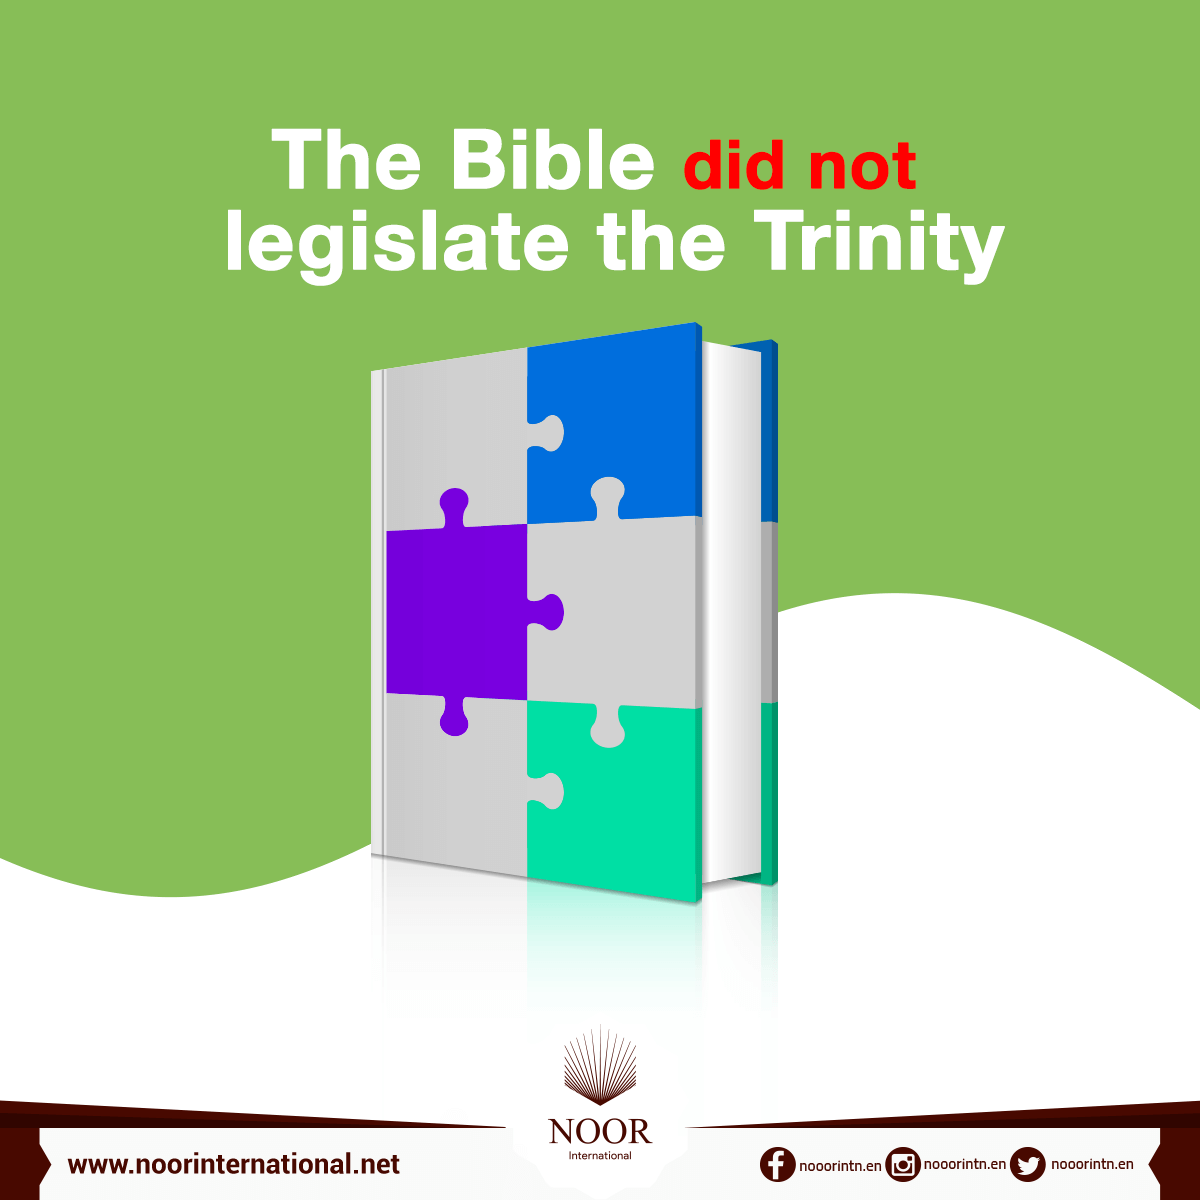 The Bible did not legislate the Trinity